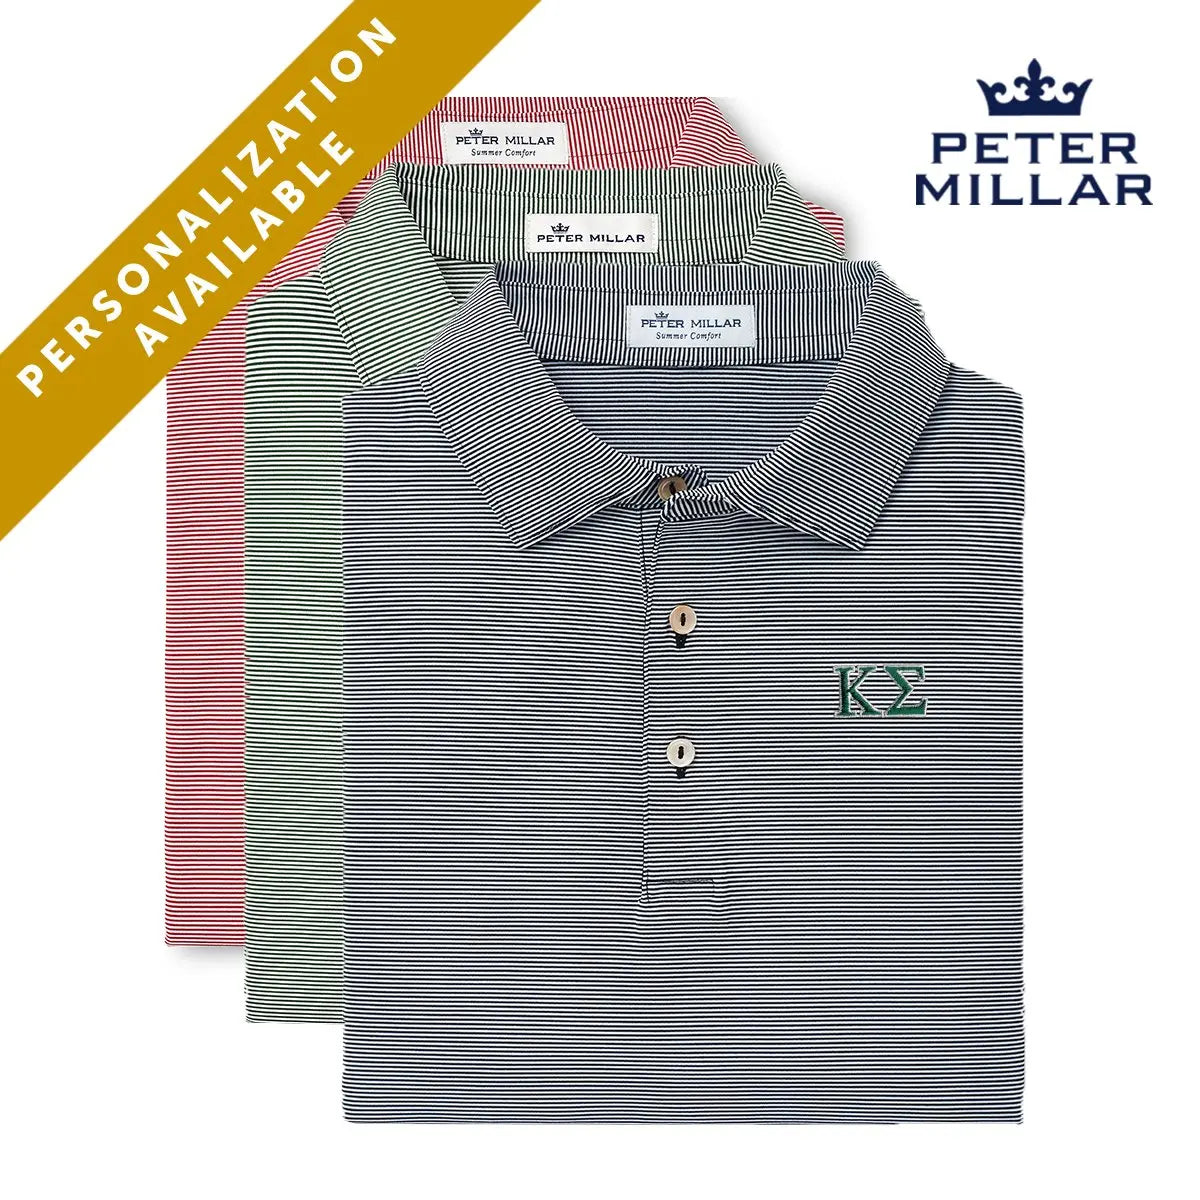 Kappa Sig Peter Millar Jubilee Stripe Stretch Jersey Polo with Greek Letters - Kappa Sigma Official Store